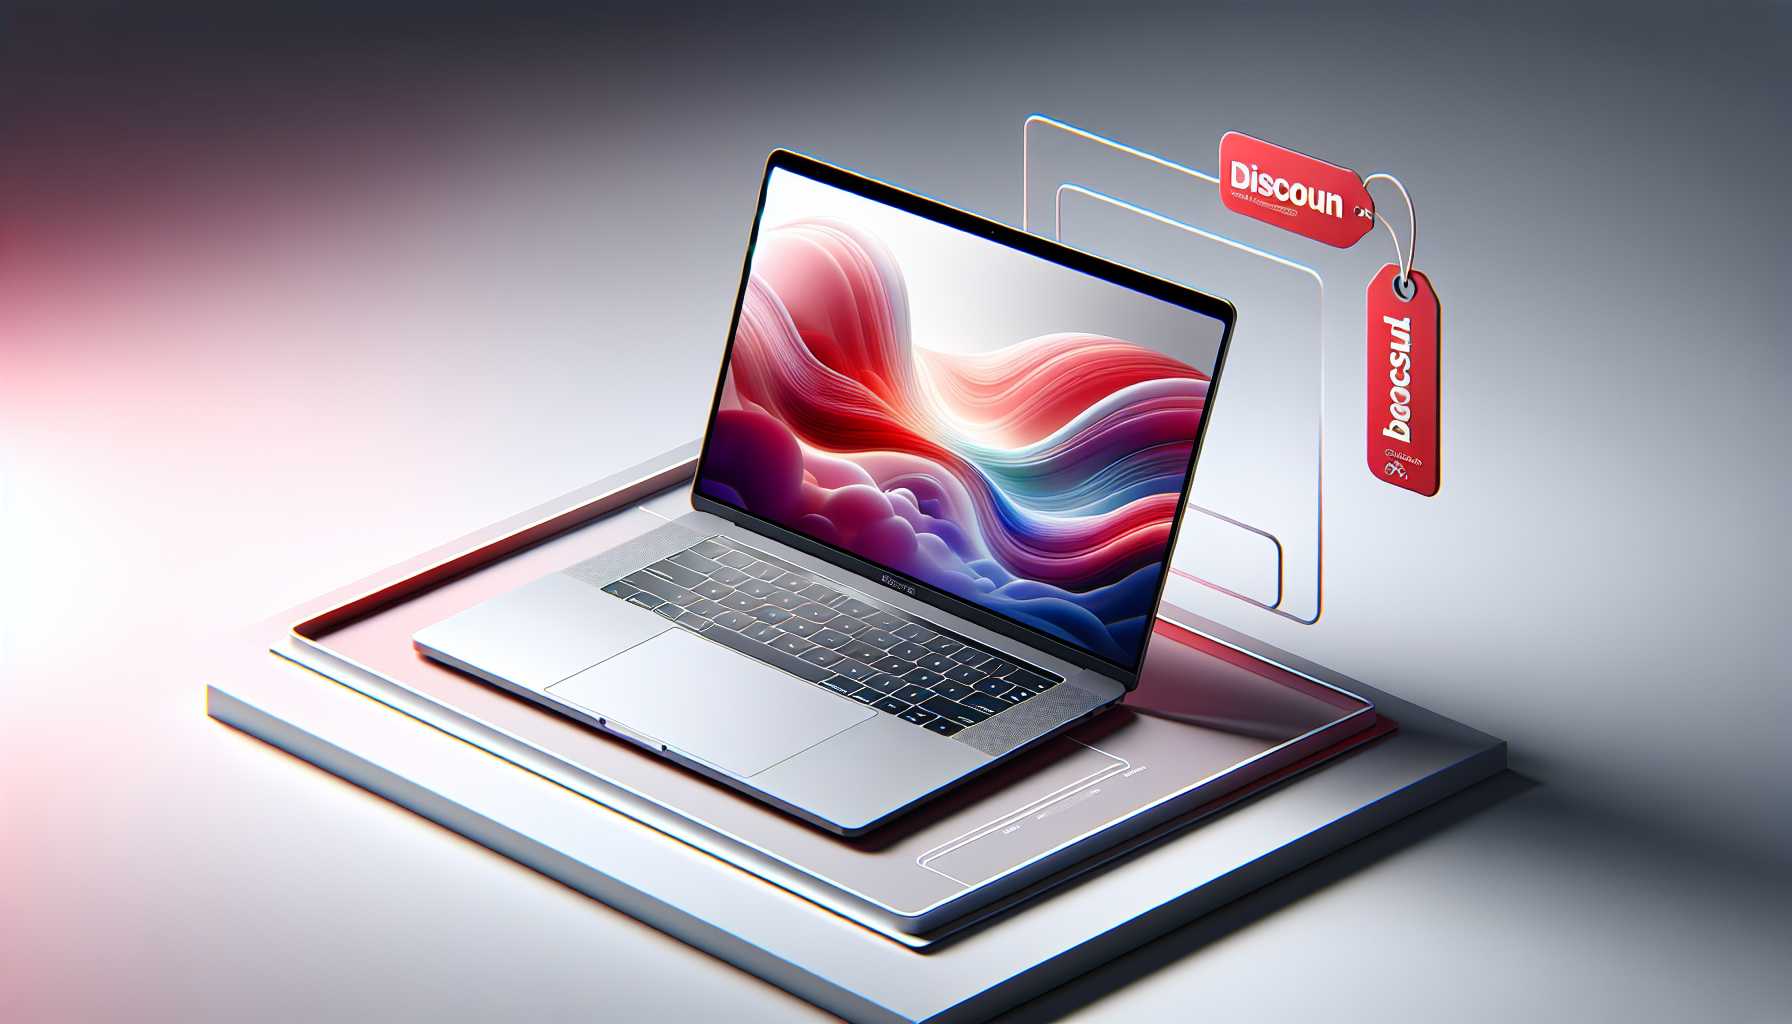 stylish advertisement for a discounted MacBook Air